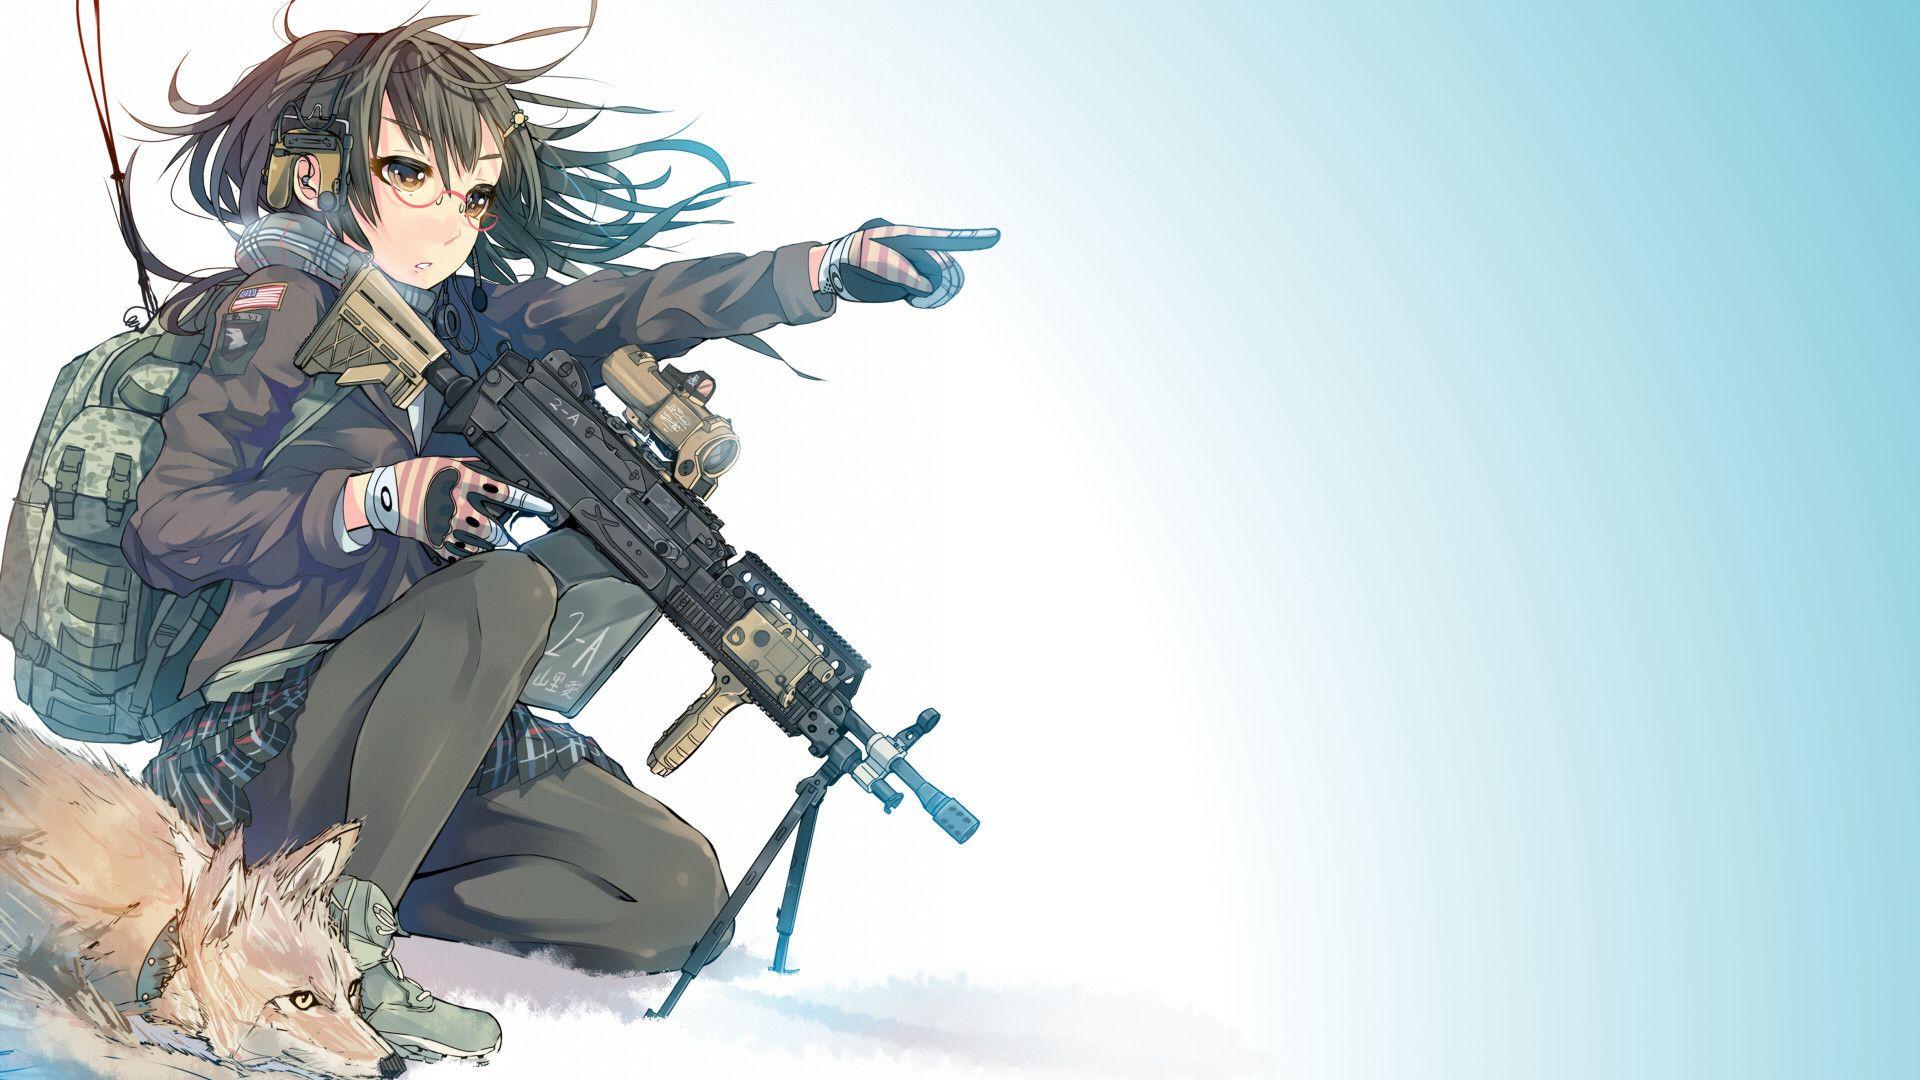 Military Anime Wallpapers - Top Free Military Anime Backgrounds